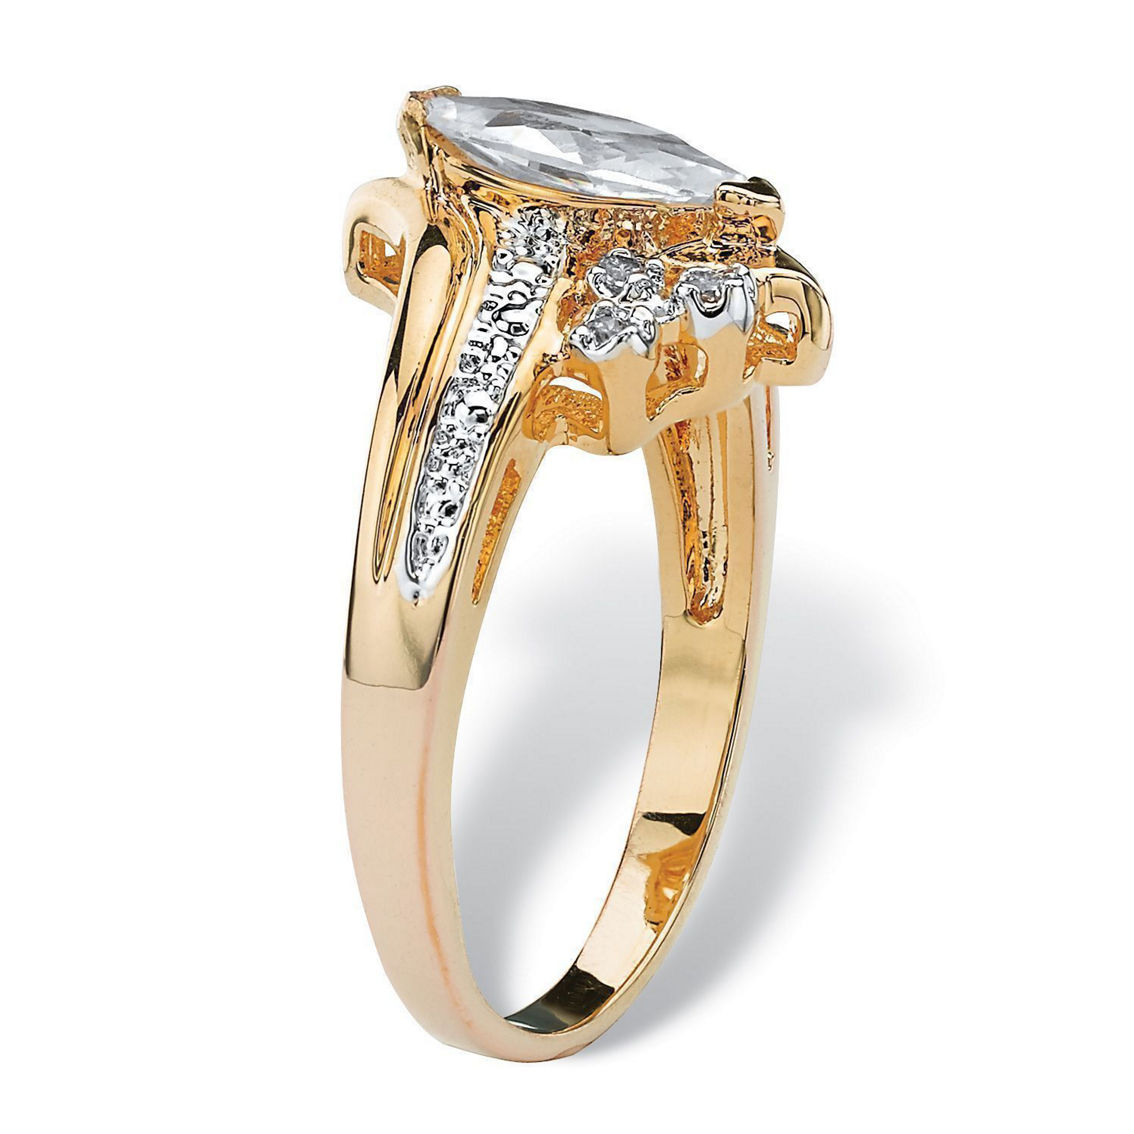 Marquise-Cut Cubic Zirconia Engagement Anniversary Ring 1.03 TCW in Gold-Plated - Image 2 of 5